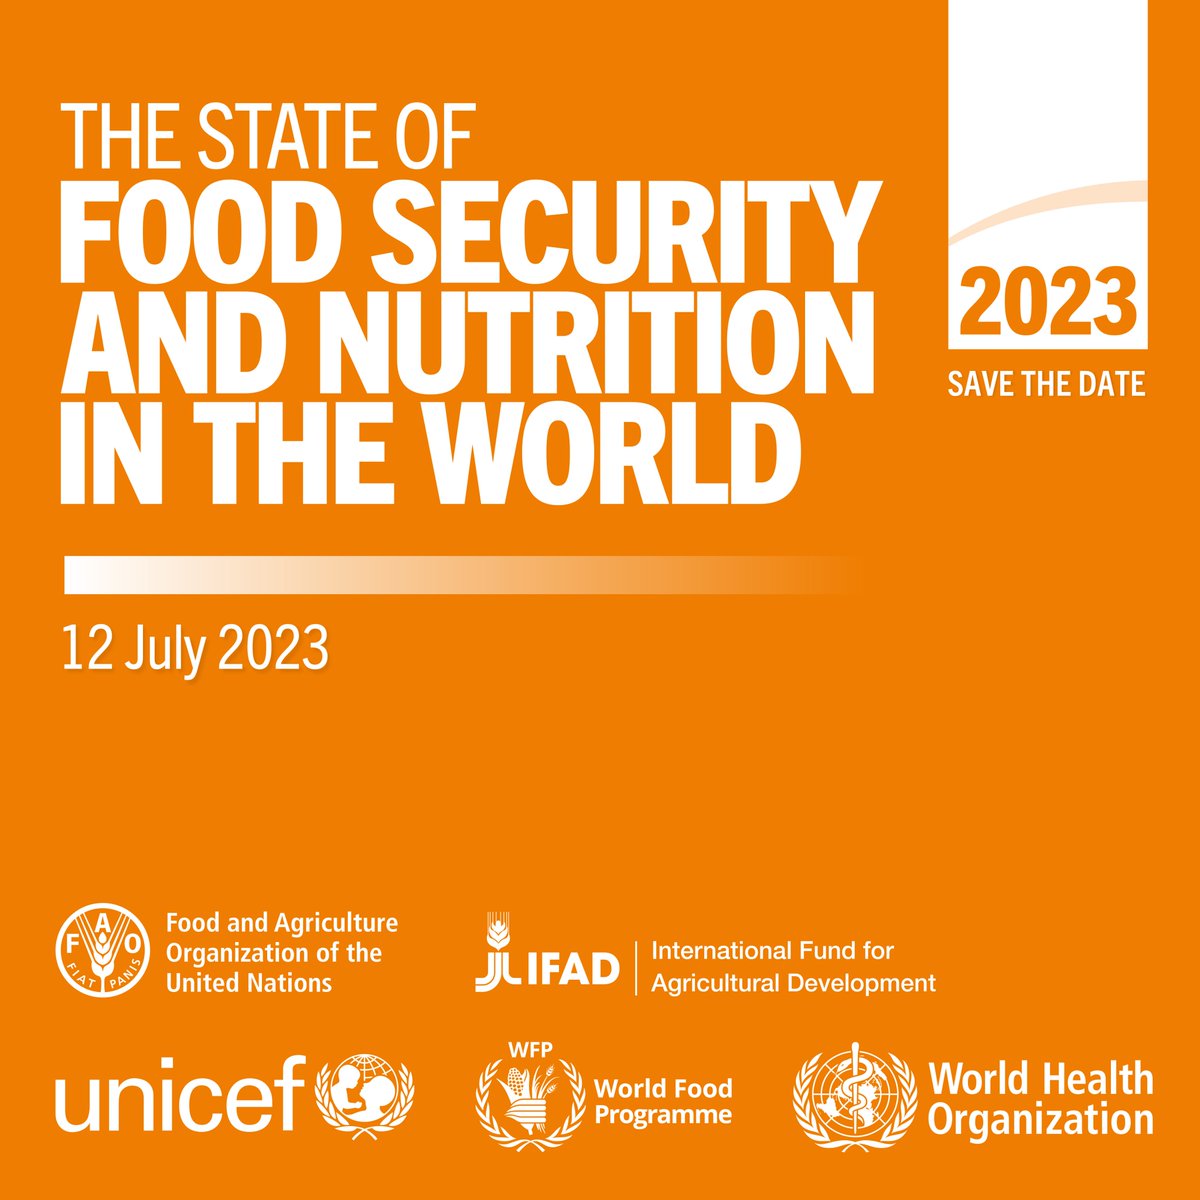 📙Join us today, 12 July, for the launch of The State of Food Security & Nutrition in the World 2023.

🕙10:00 AM, New York (EST) / 4:00 PM, Rome (CEST)

More info👉bit.ly/44vsGpj
Webcast👉bit.ly/3O0lQCL

#SOFI2023 #HLPF